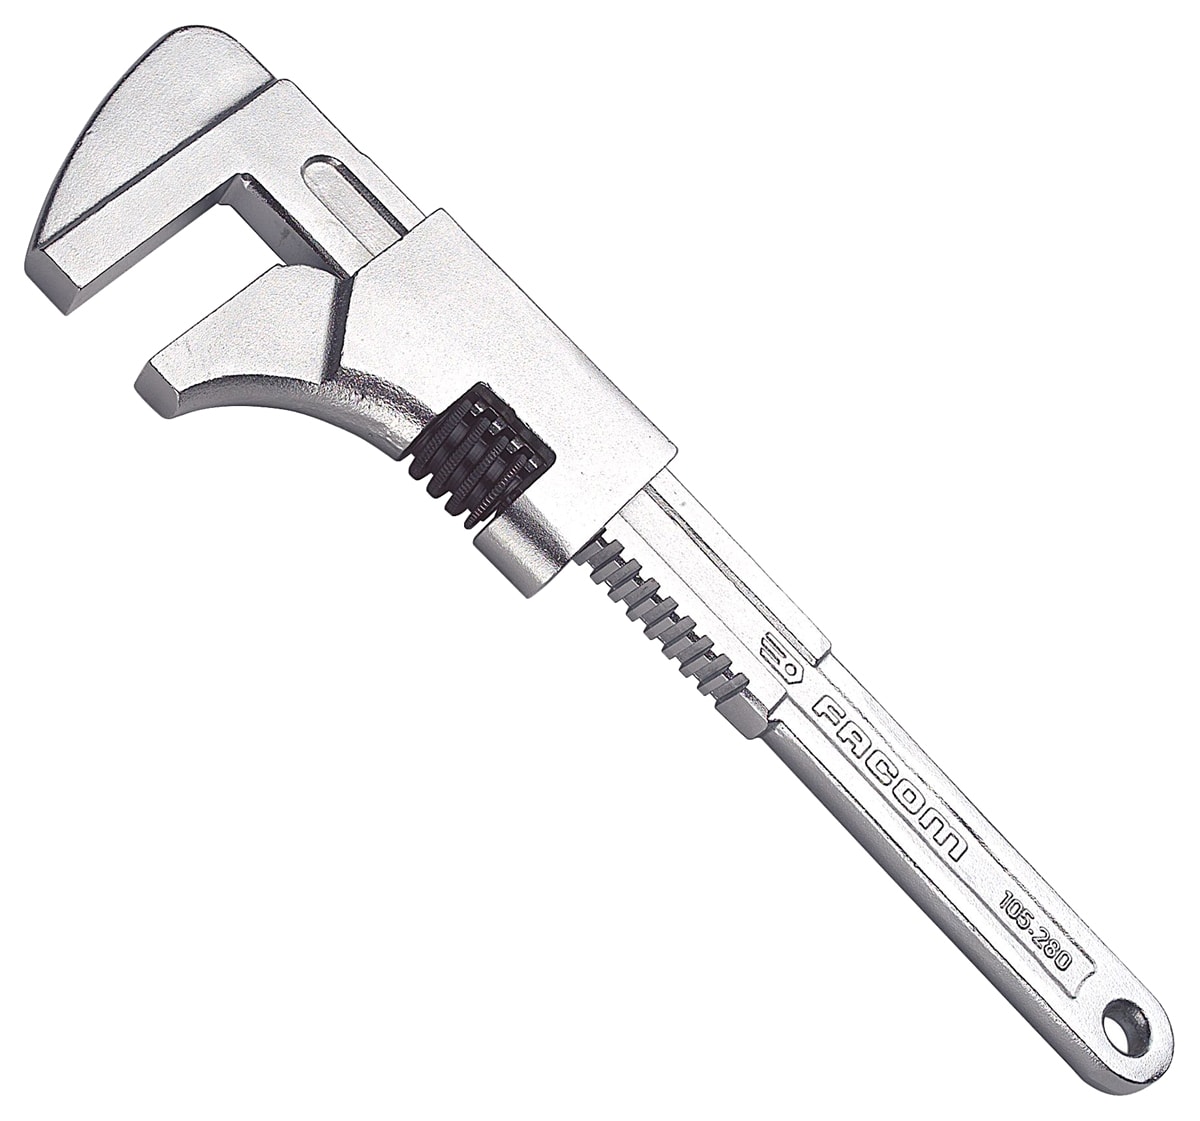 types of adjustable wrenches